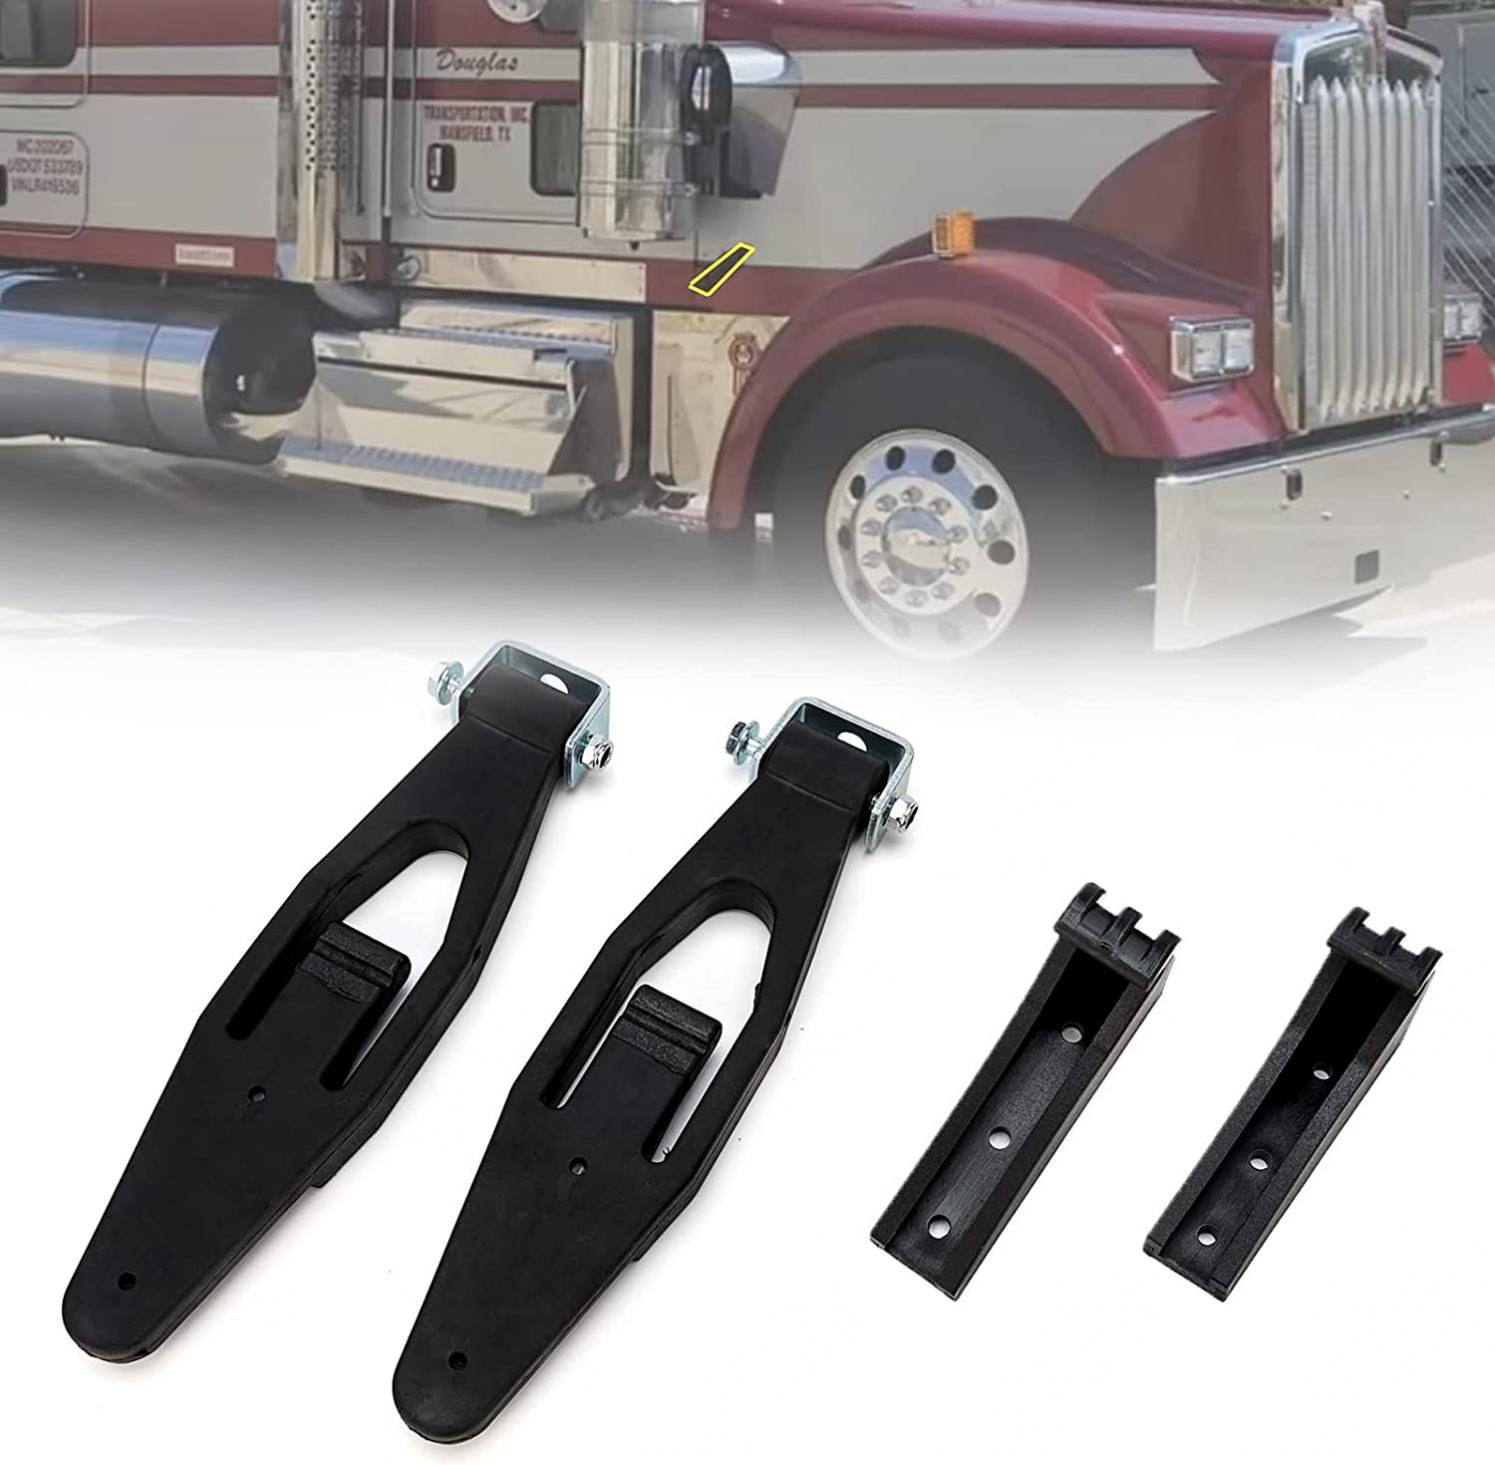 L56-0001 Hood Latch Kit Compatible With Kenworth & Peterbilt, Replace 315-5401 HLK1035 2312857 2313857